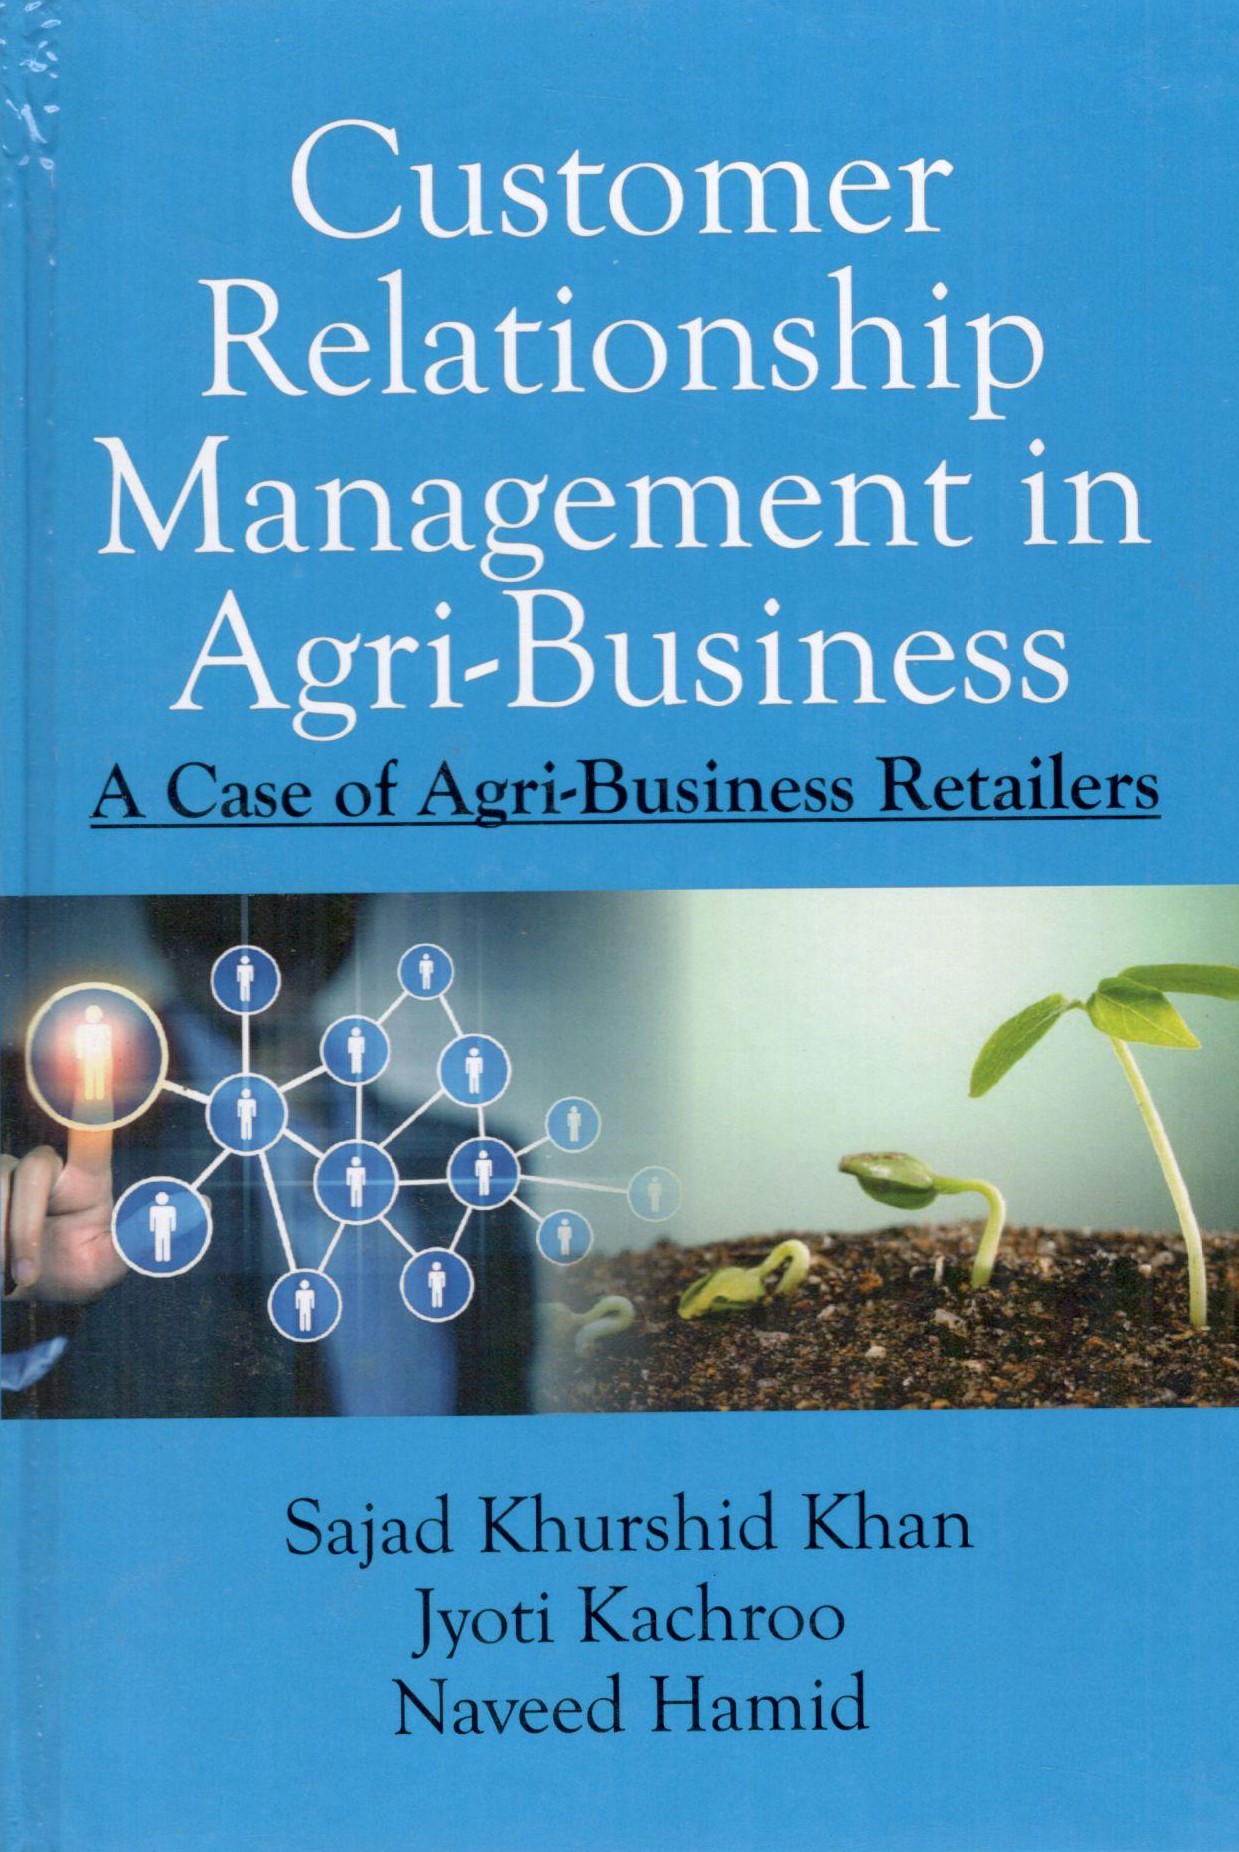 Customer Relationship Management In Agri-Business A Case Of Agri-Business Retailers